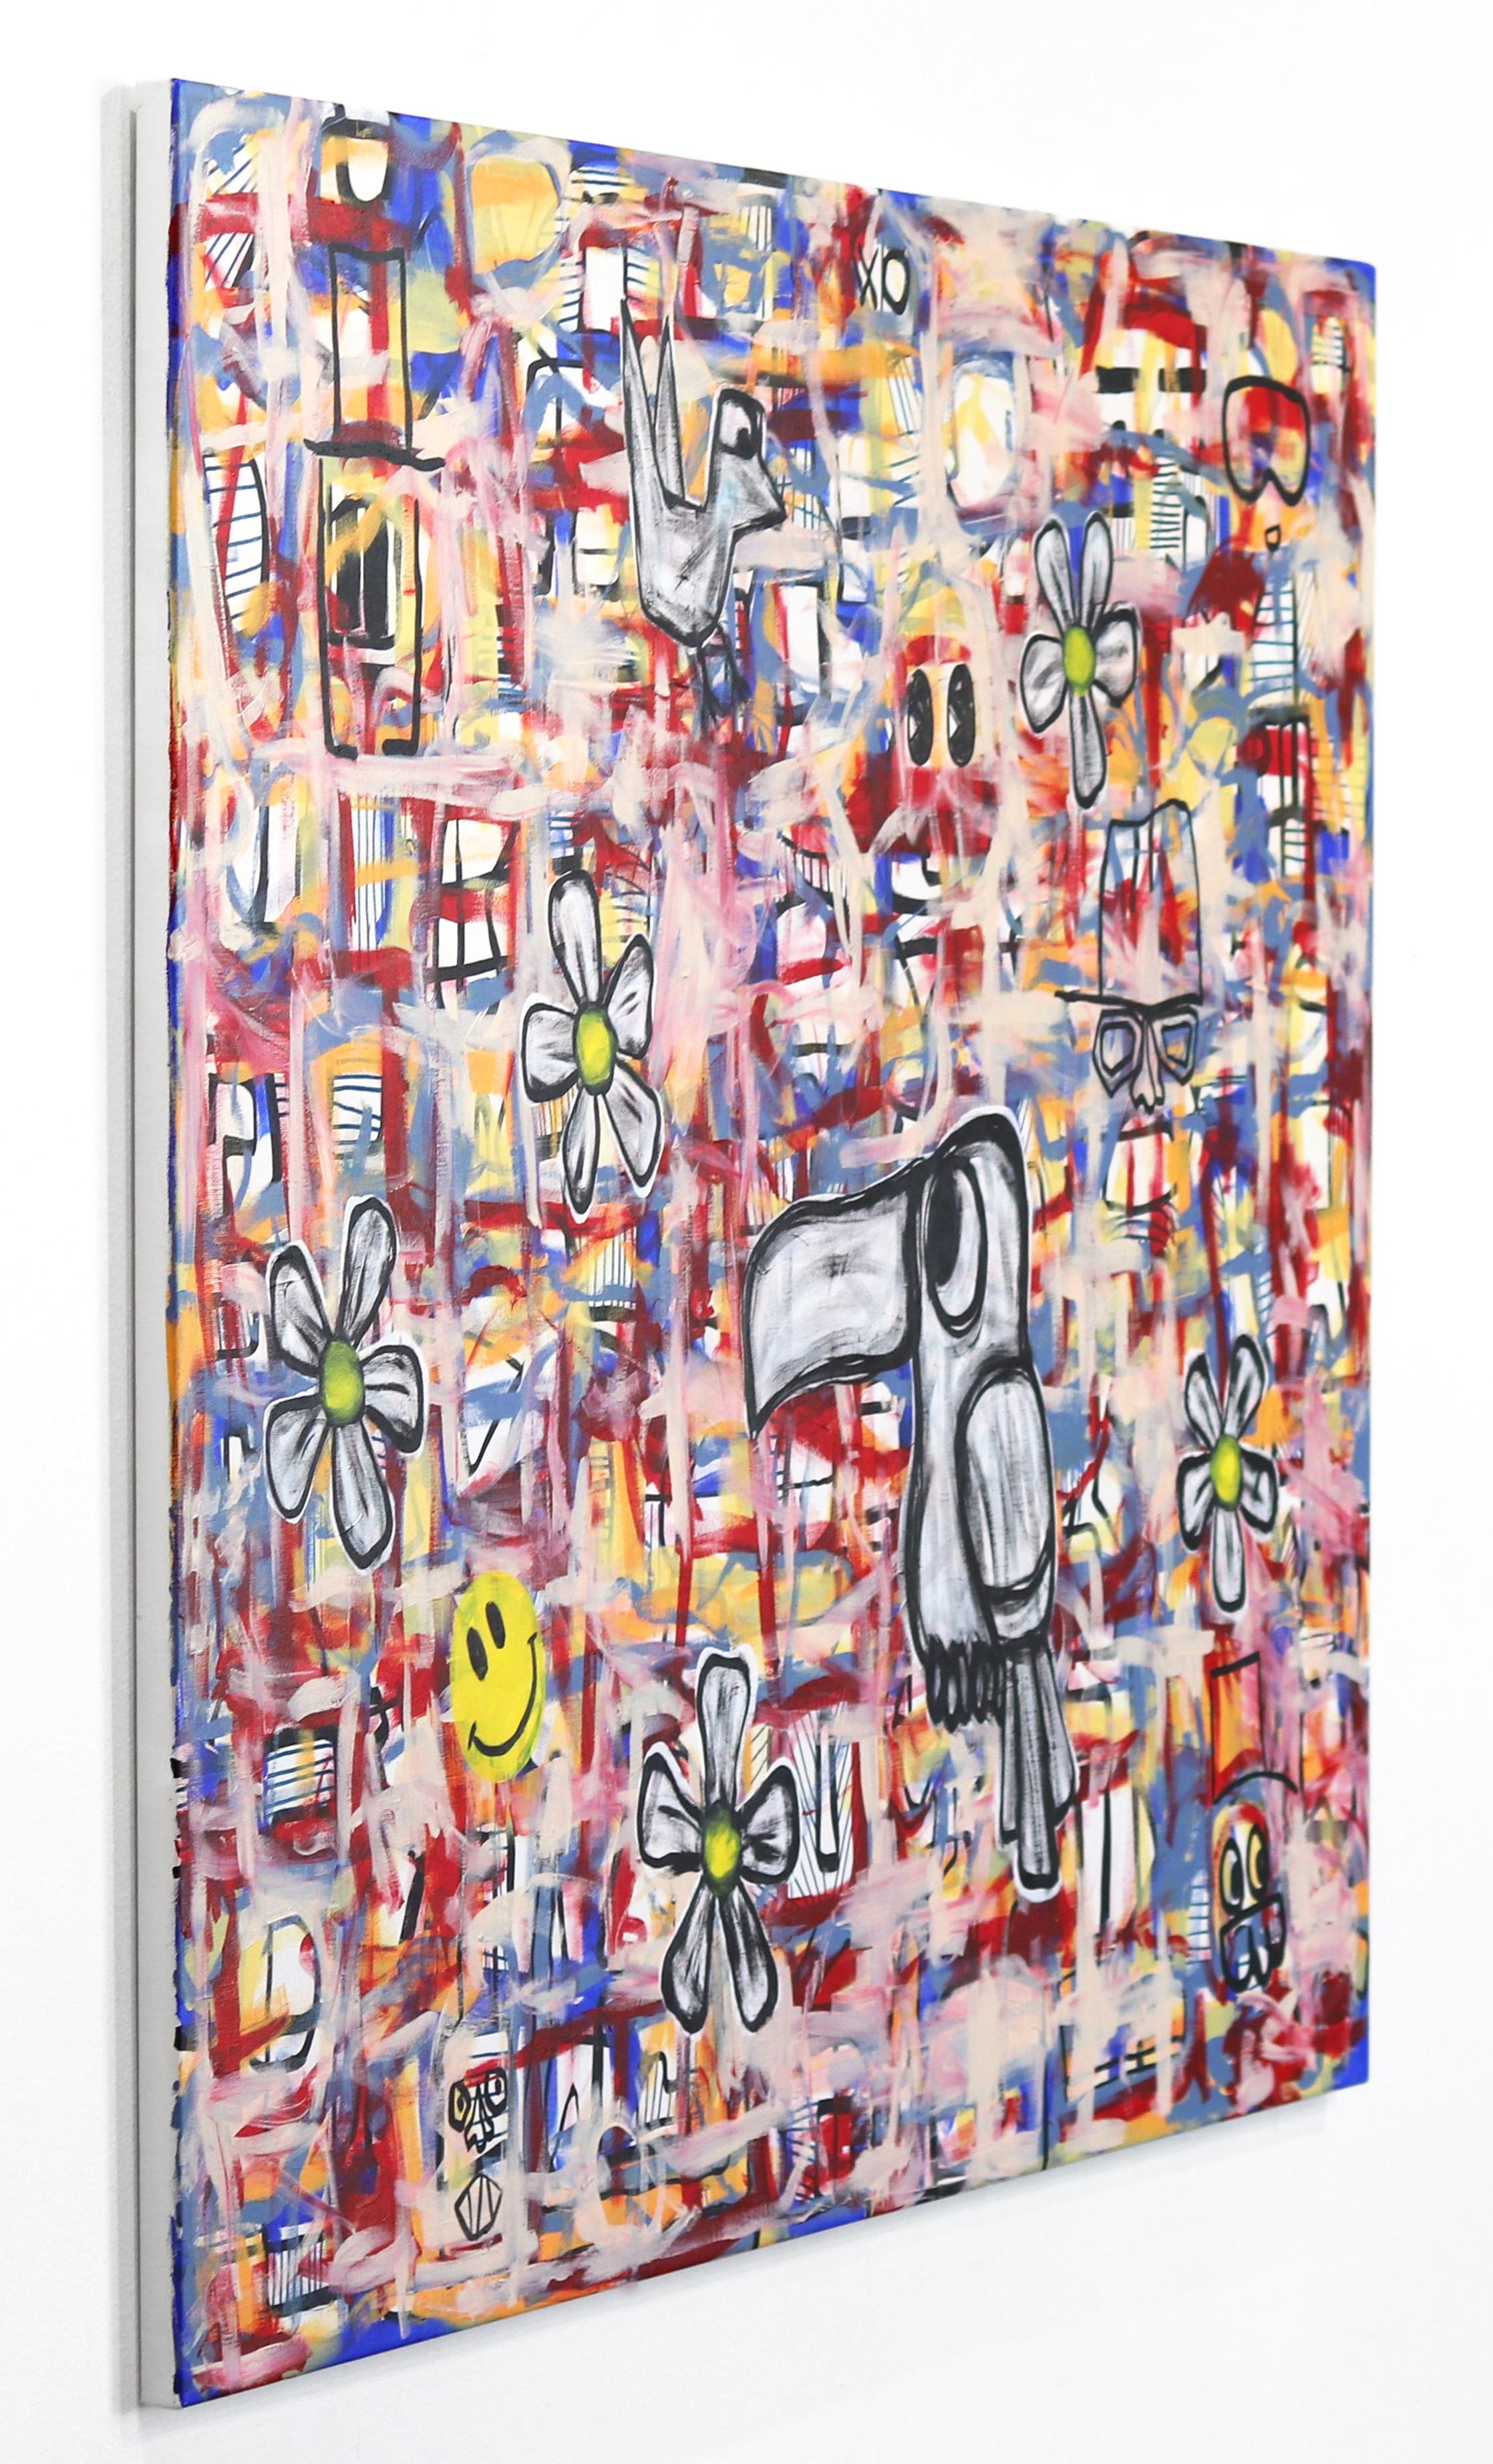 Urban abstract expressionism artist Tommy Lennartsson draws on the visual culture of street and pop art when creating his original vibrant mixed-media artworks. He employs a mix of abstract and figurative elements that give nods to